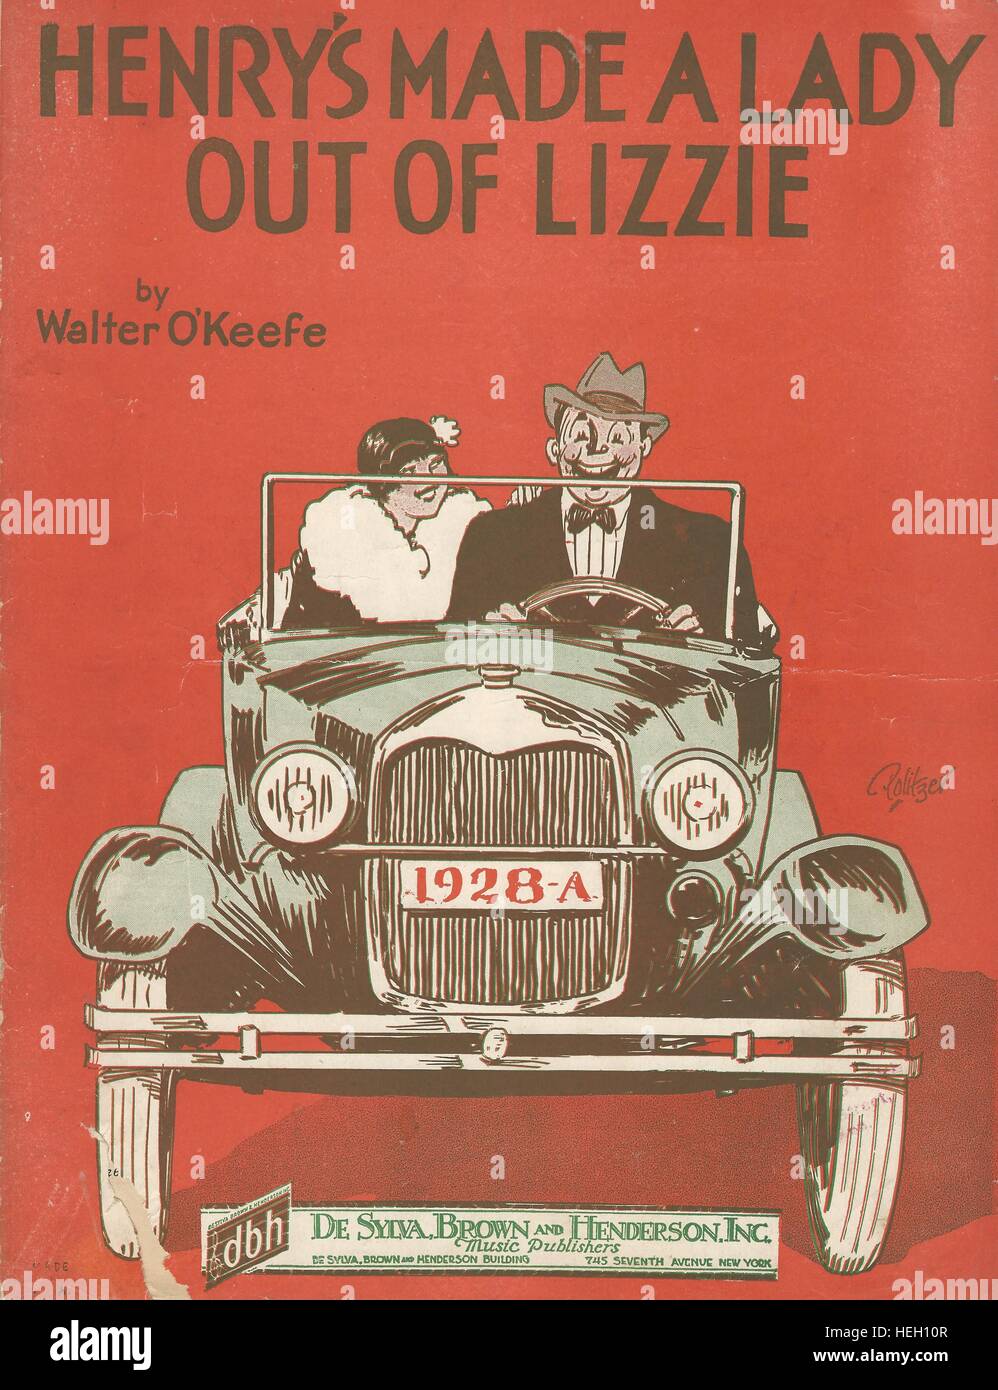 'Henry's Made a Lady Out of Lizzie' 1928 Sheet Music Cover Stock Photo